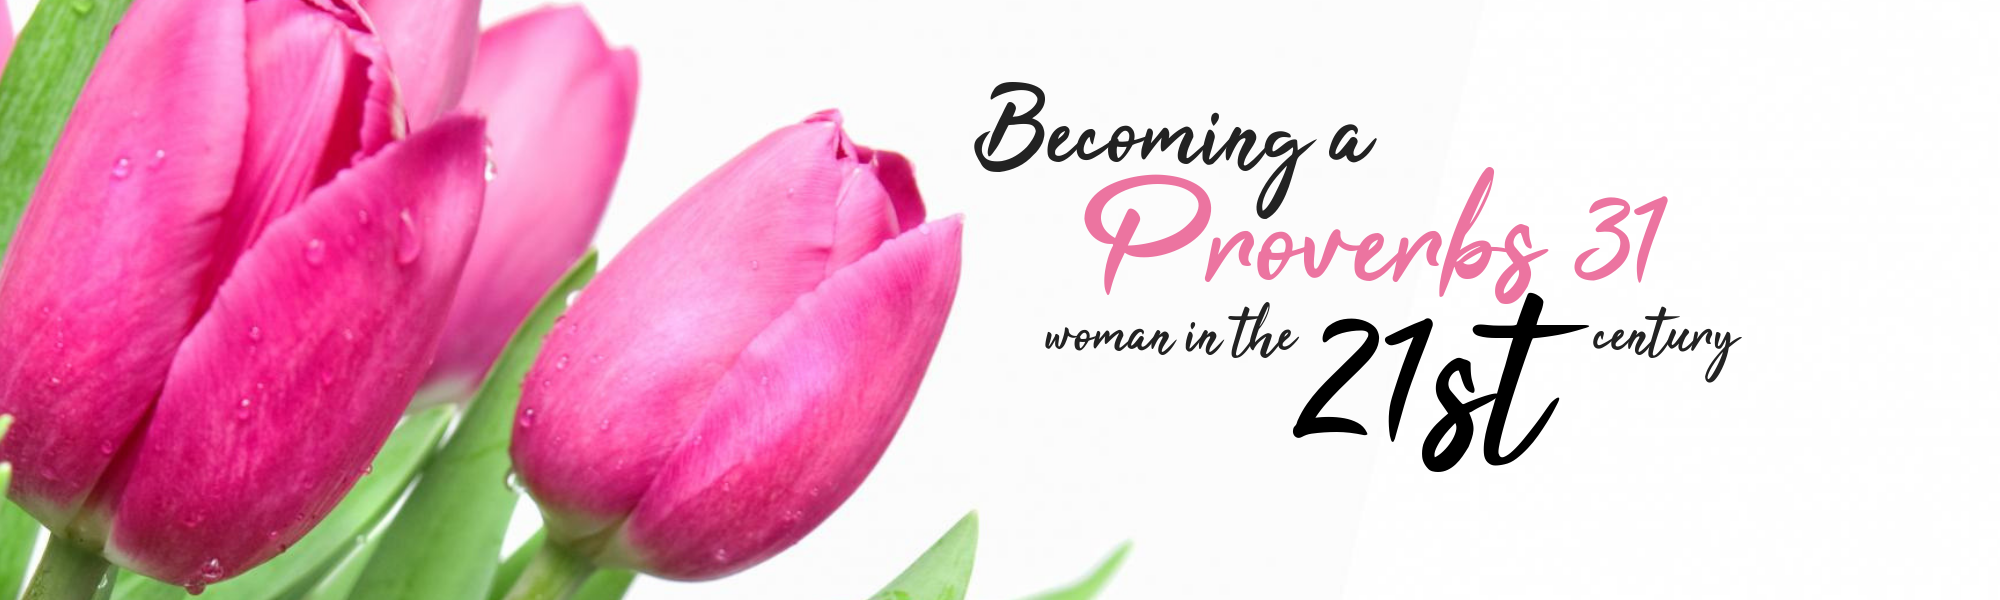 Becoming a proverbs 31 woman in the 21st century 